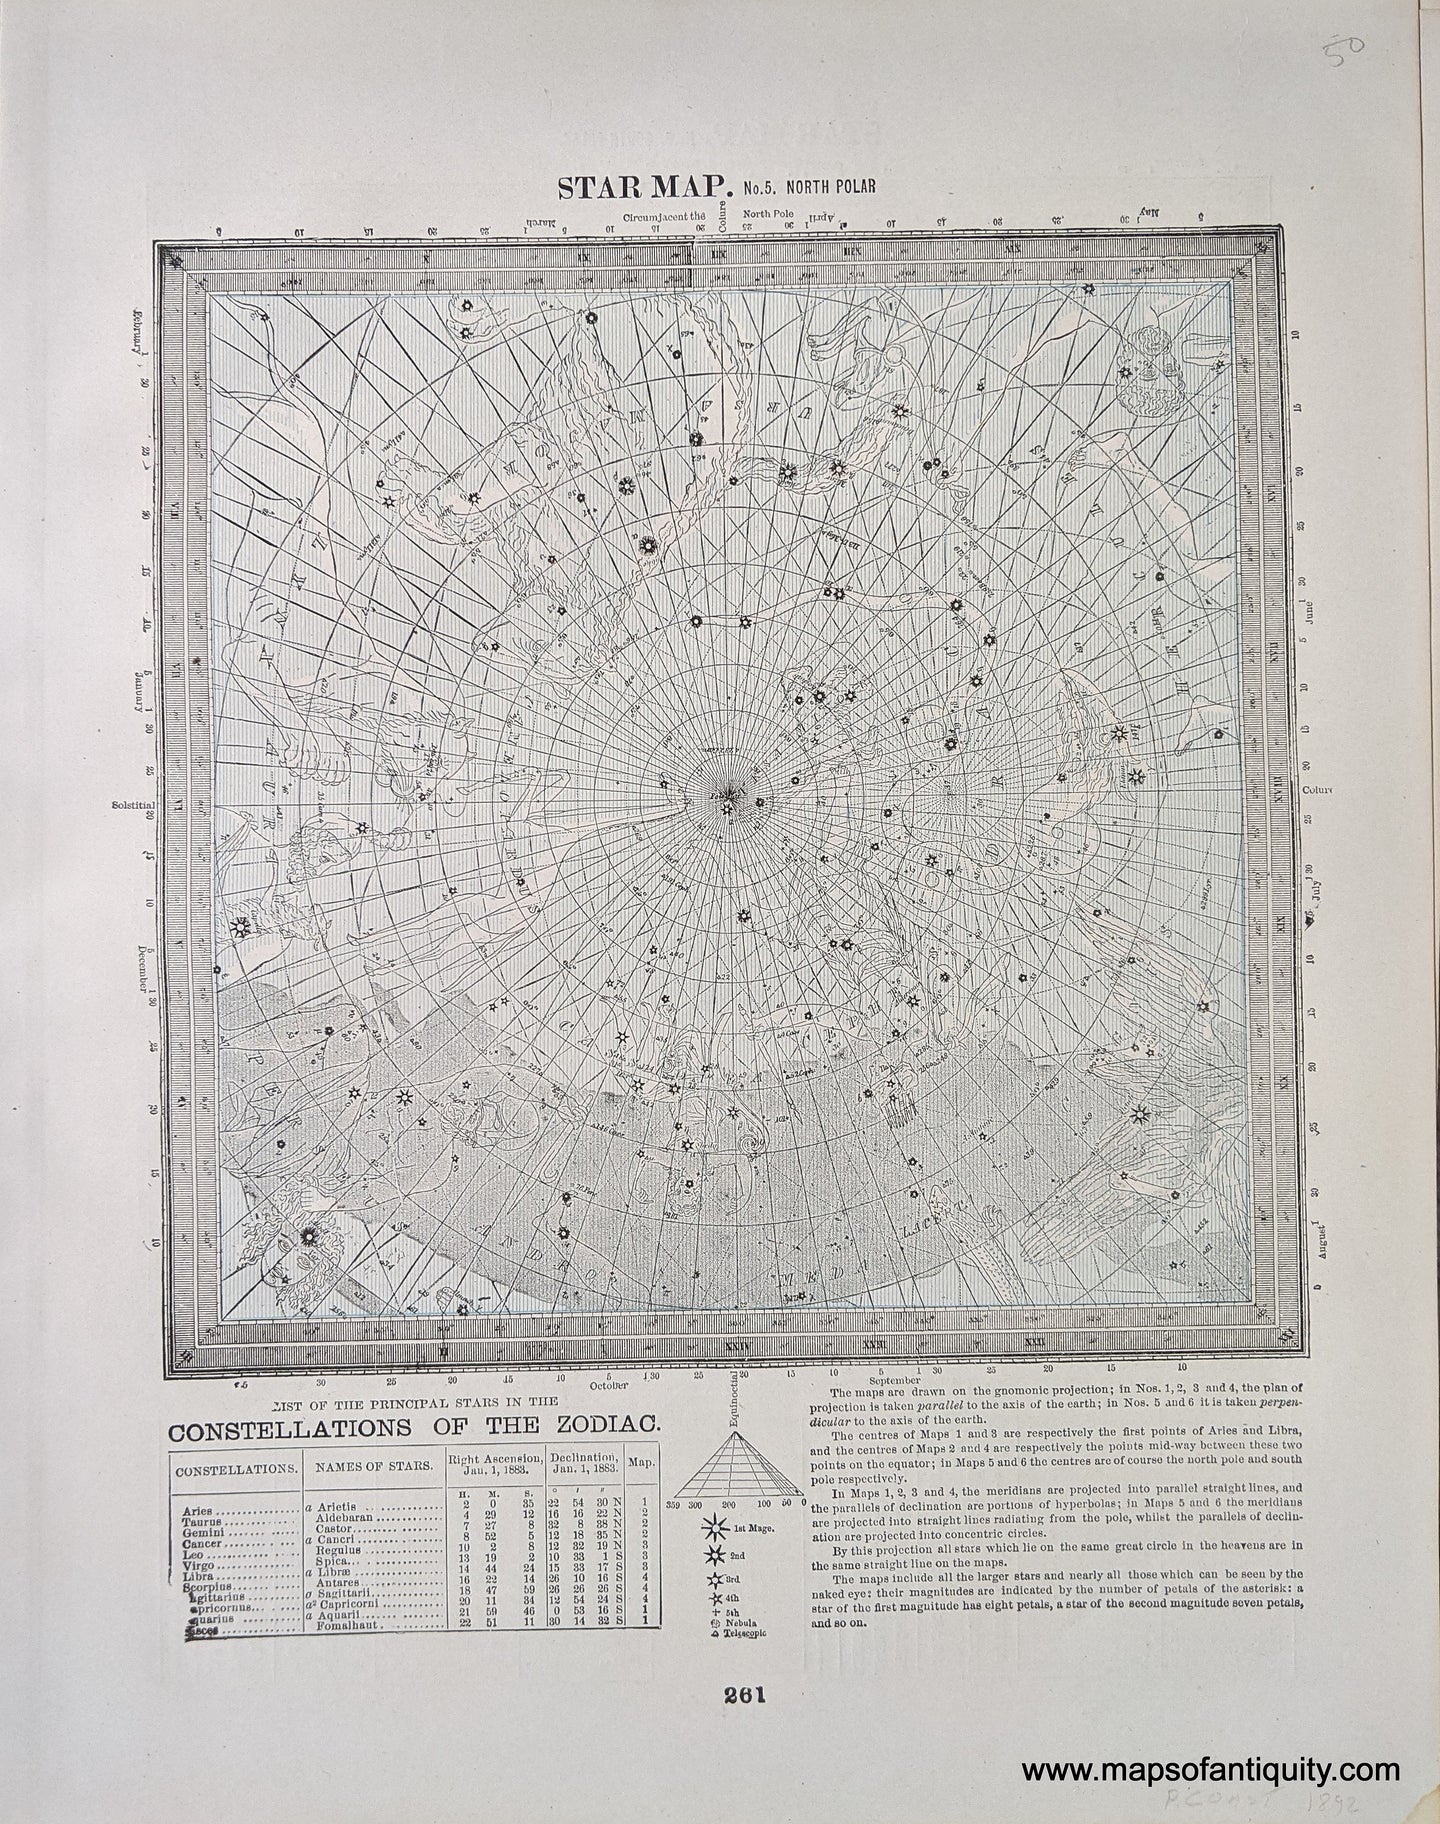 Genuine-Antique-Printed-Color-Comparative-Chart-Star-Map-No.-5-North-Polar;-verso:-Star-Map-No.-6-South-Polar-Celestial--1892-Home-Library-&-Supply-Association-Maps-Of-Antiquity-1800s-19th-century